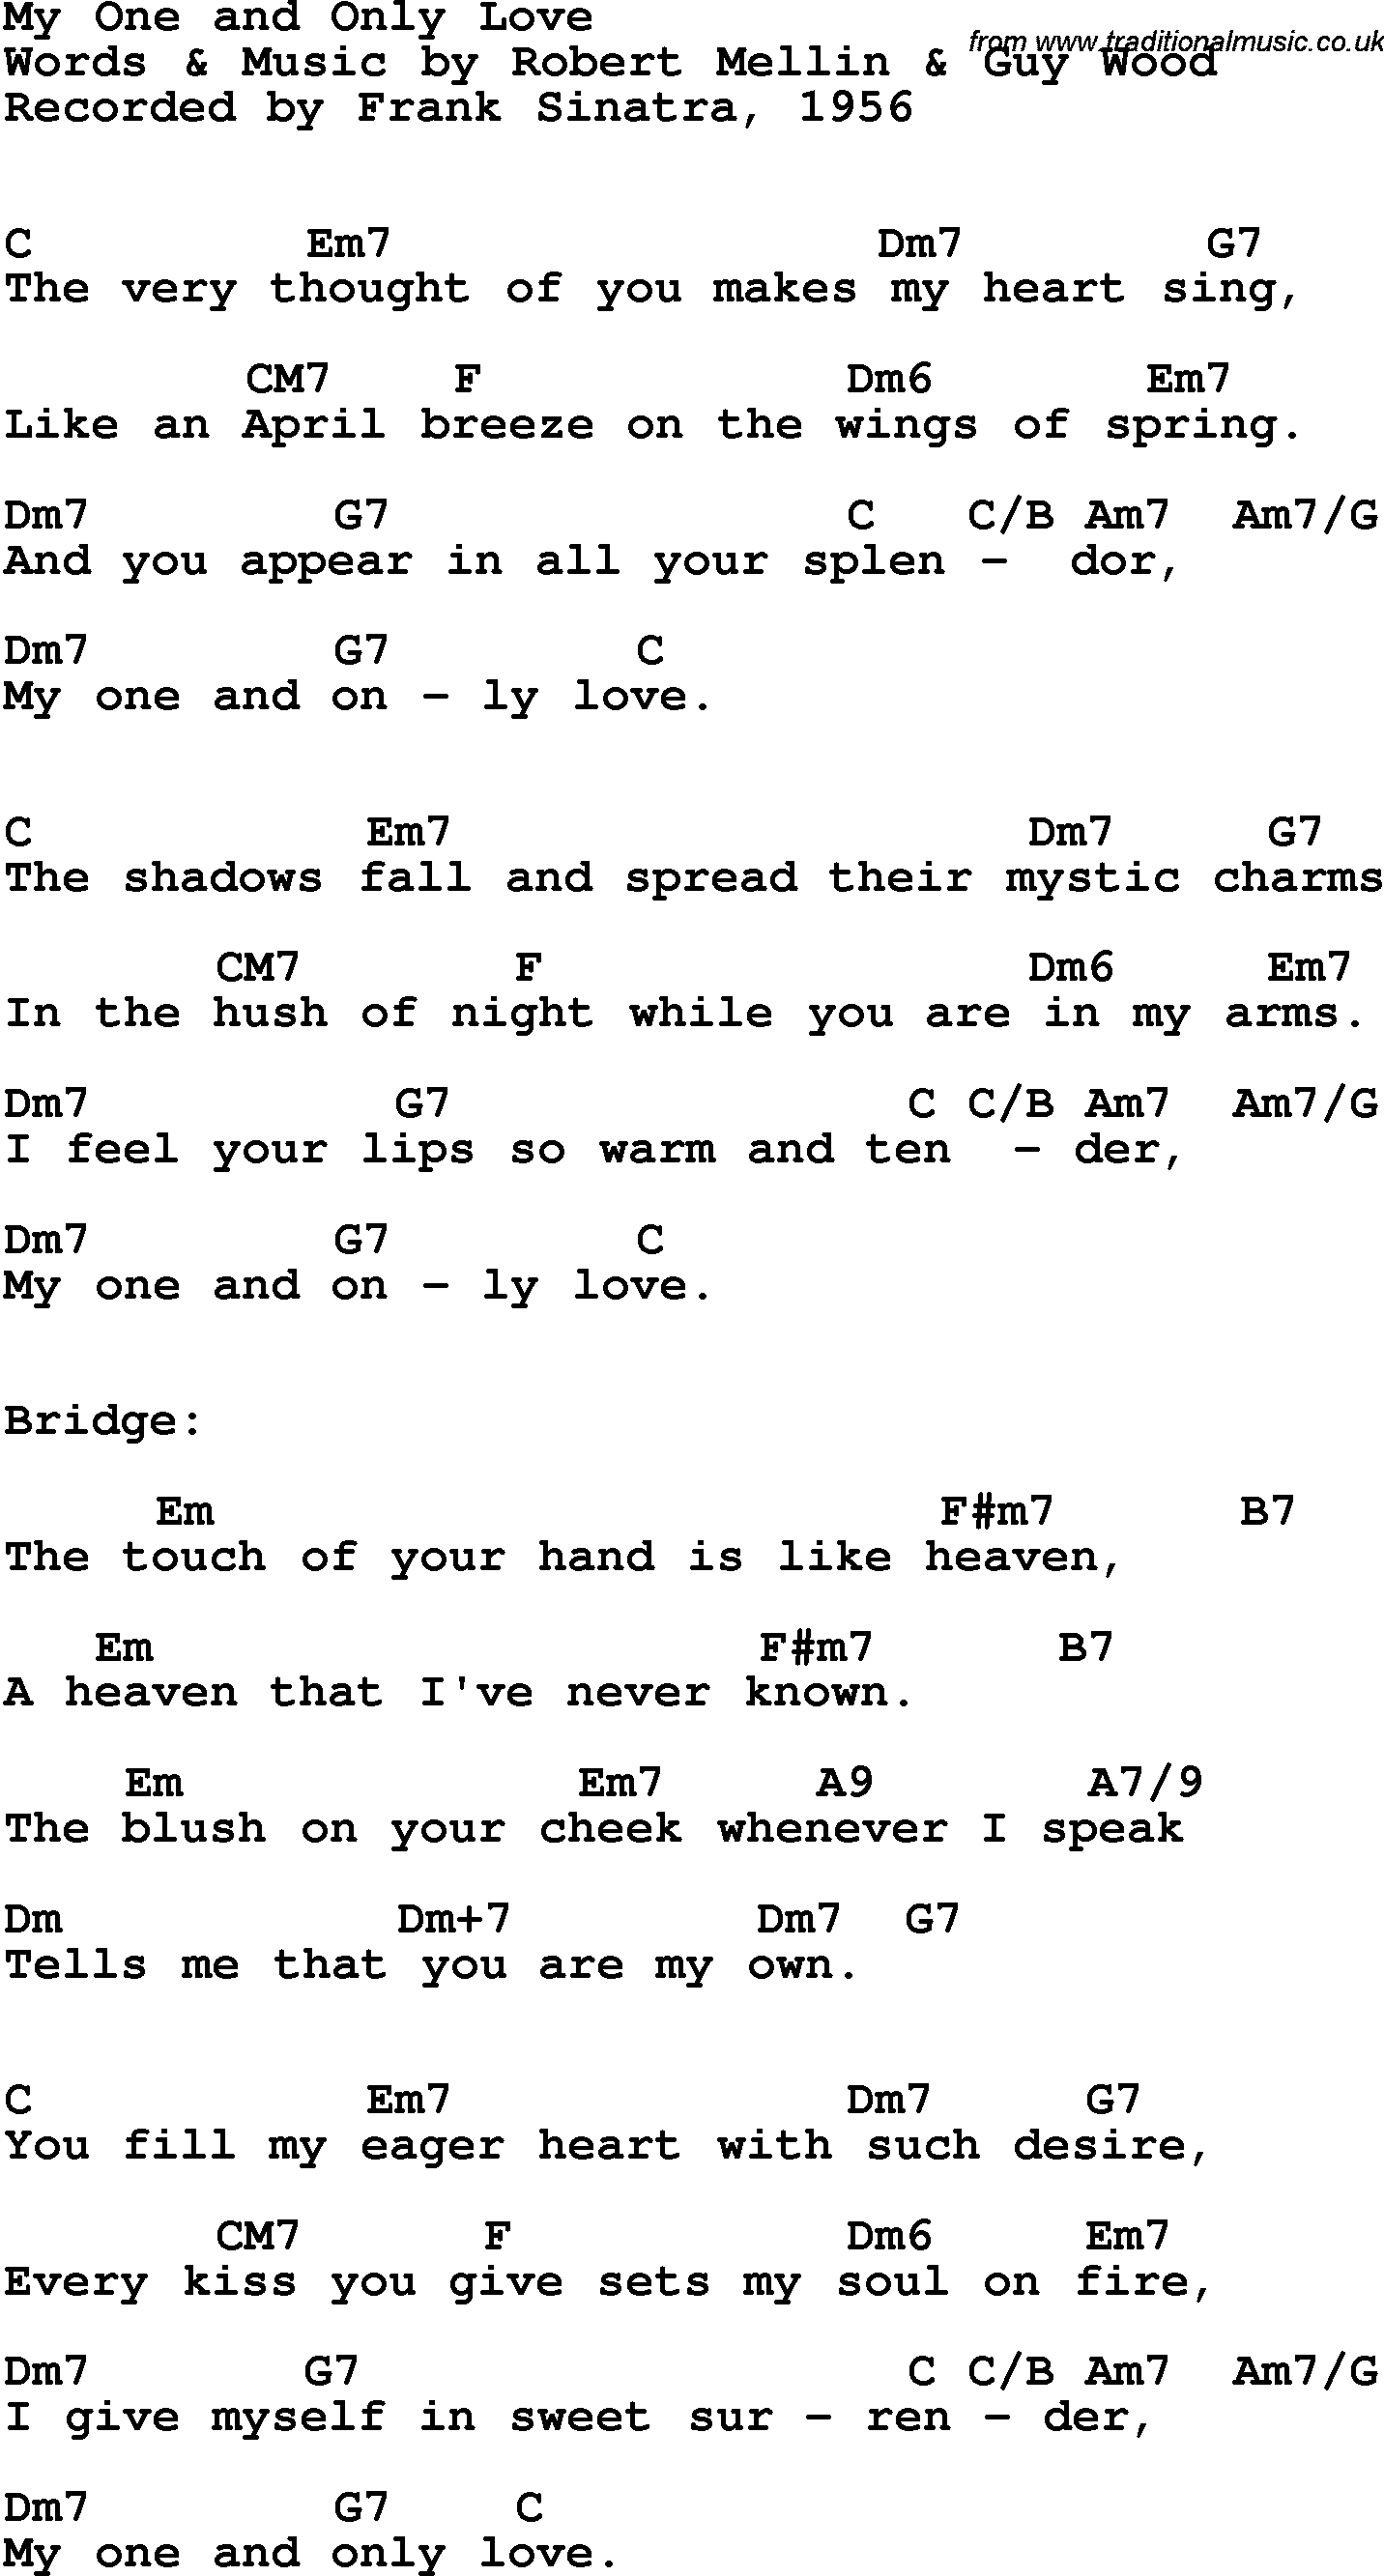 Song Lyrics with guitar chords for My One And Only Love - Frank Sinatra, 1956